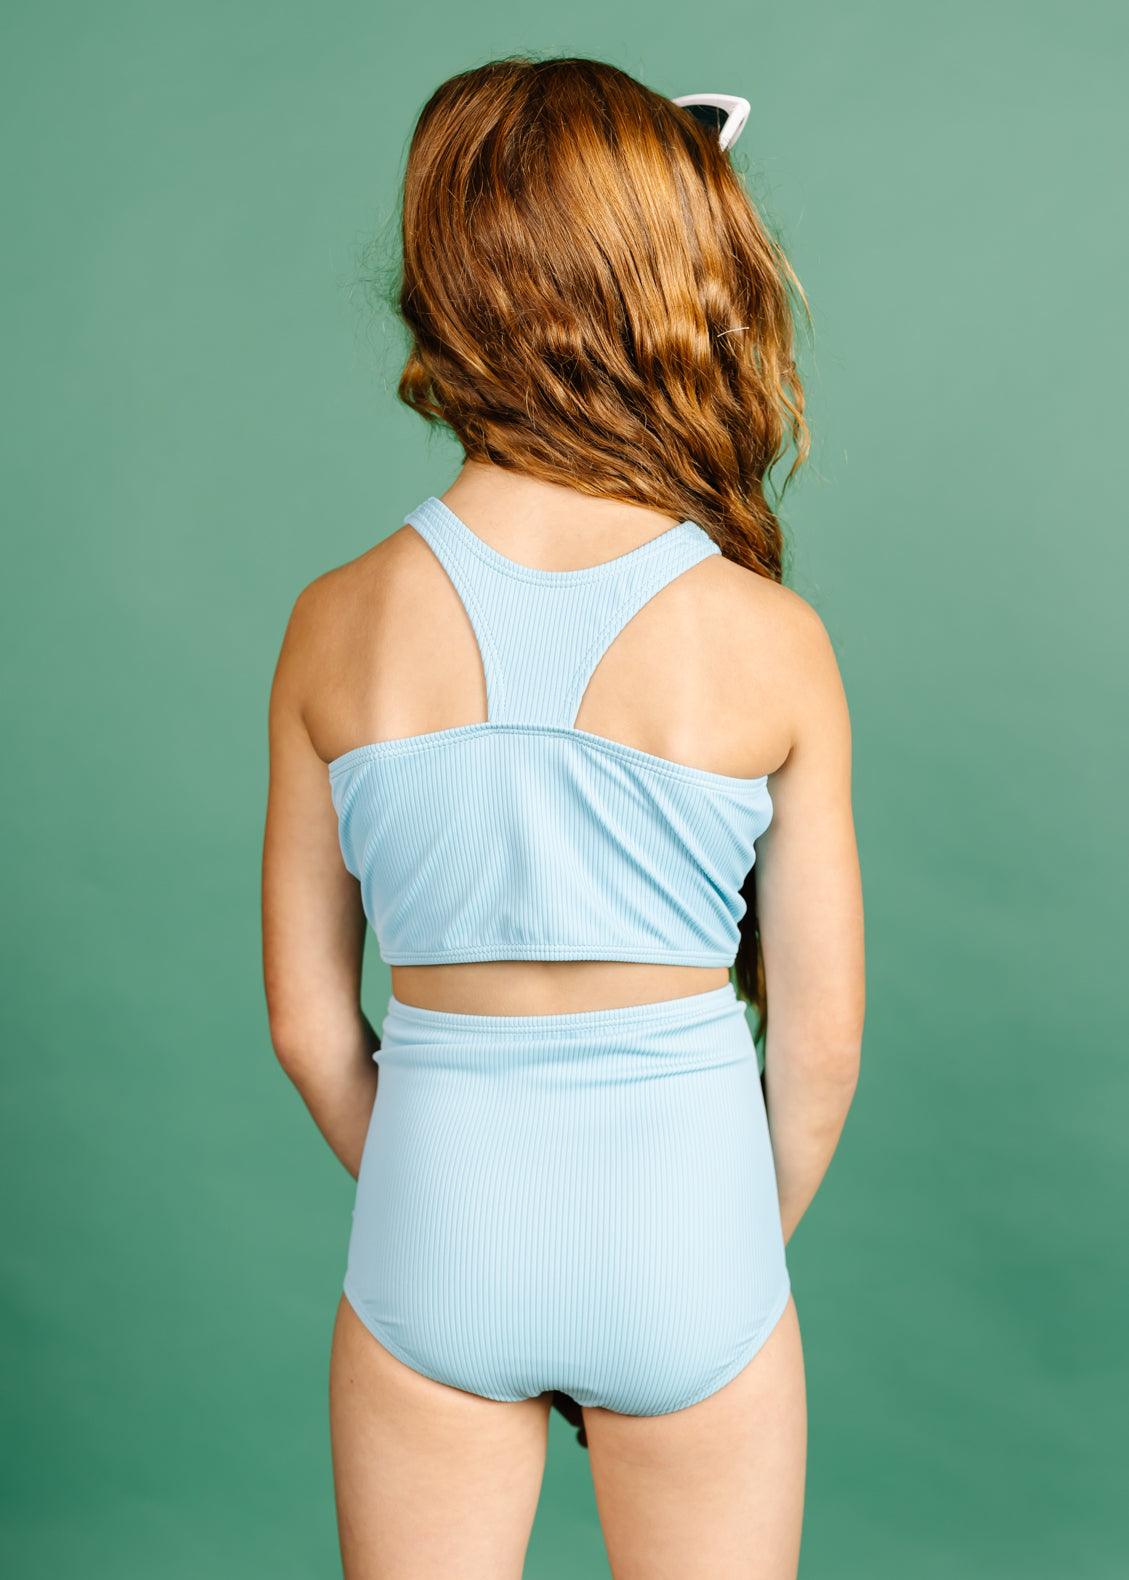 Girls Crop Top Swimsuit - Ribbed Fresh Blue